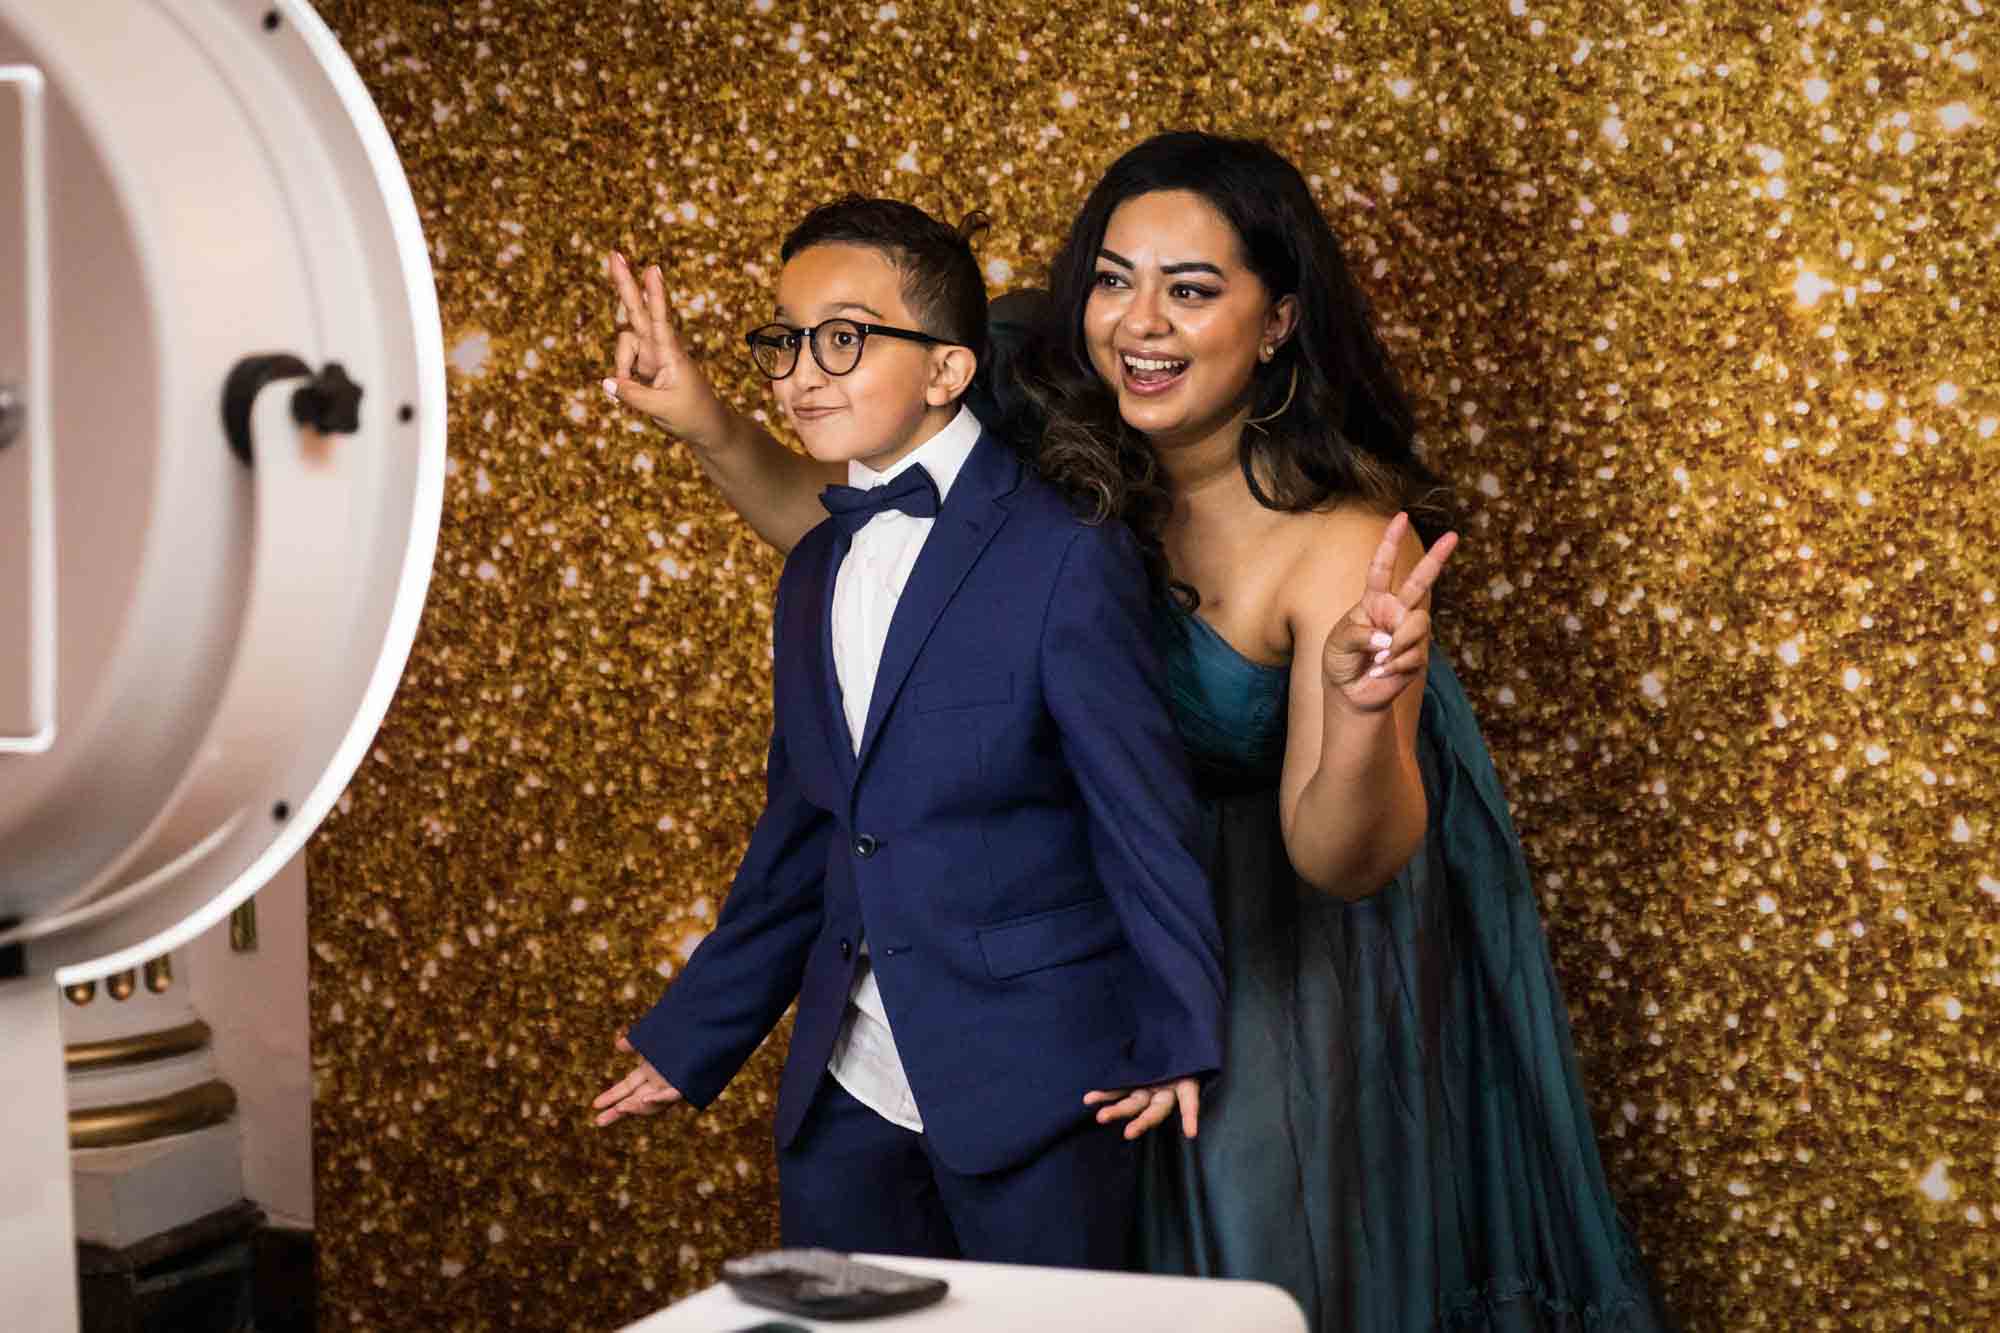 Woman standing behind boy wearing bow tie in front of gold background of photo booth for an article on Terrace on the Park wedding photo tips